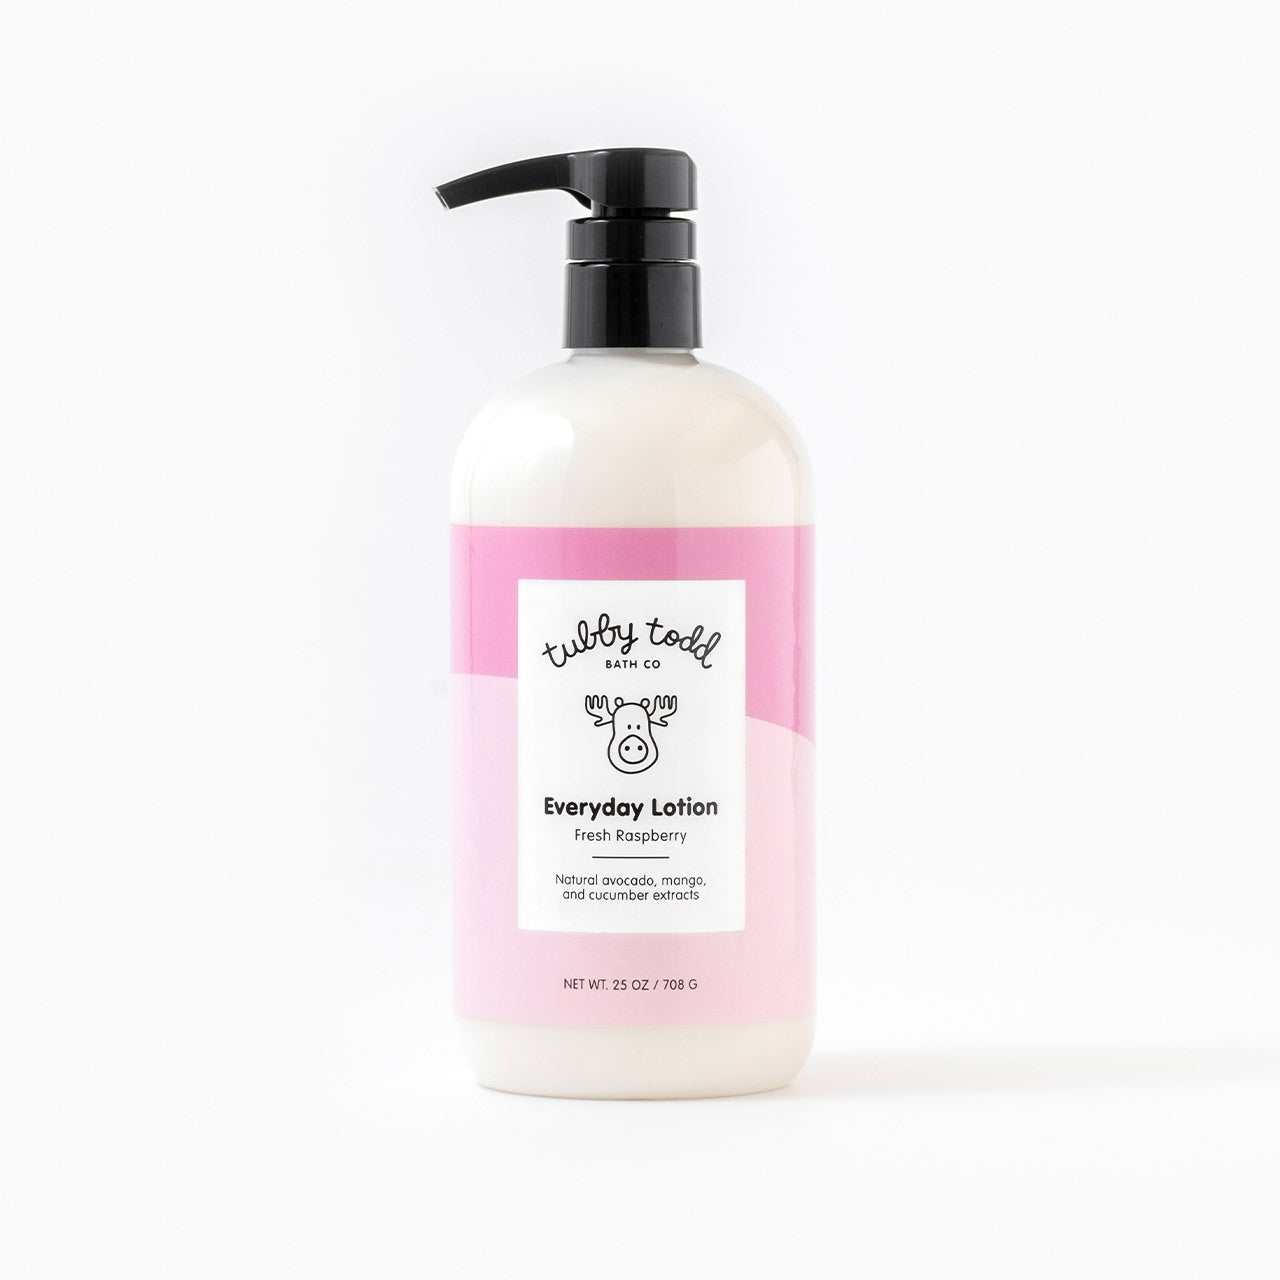 25oz Fresh Raspberry Everyday Lotion bottle standing on the white background.